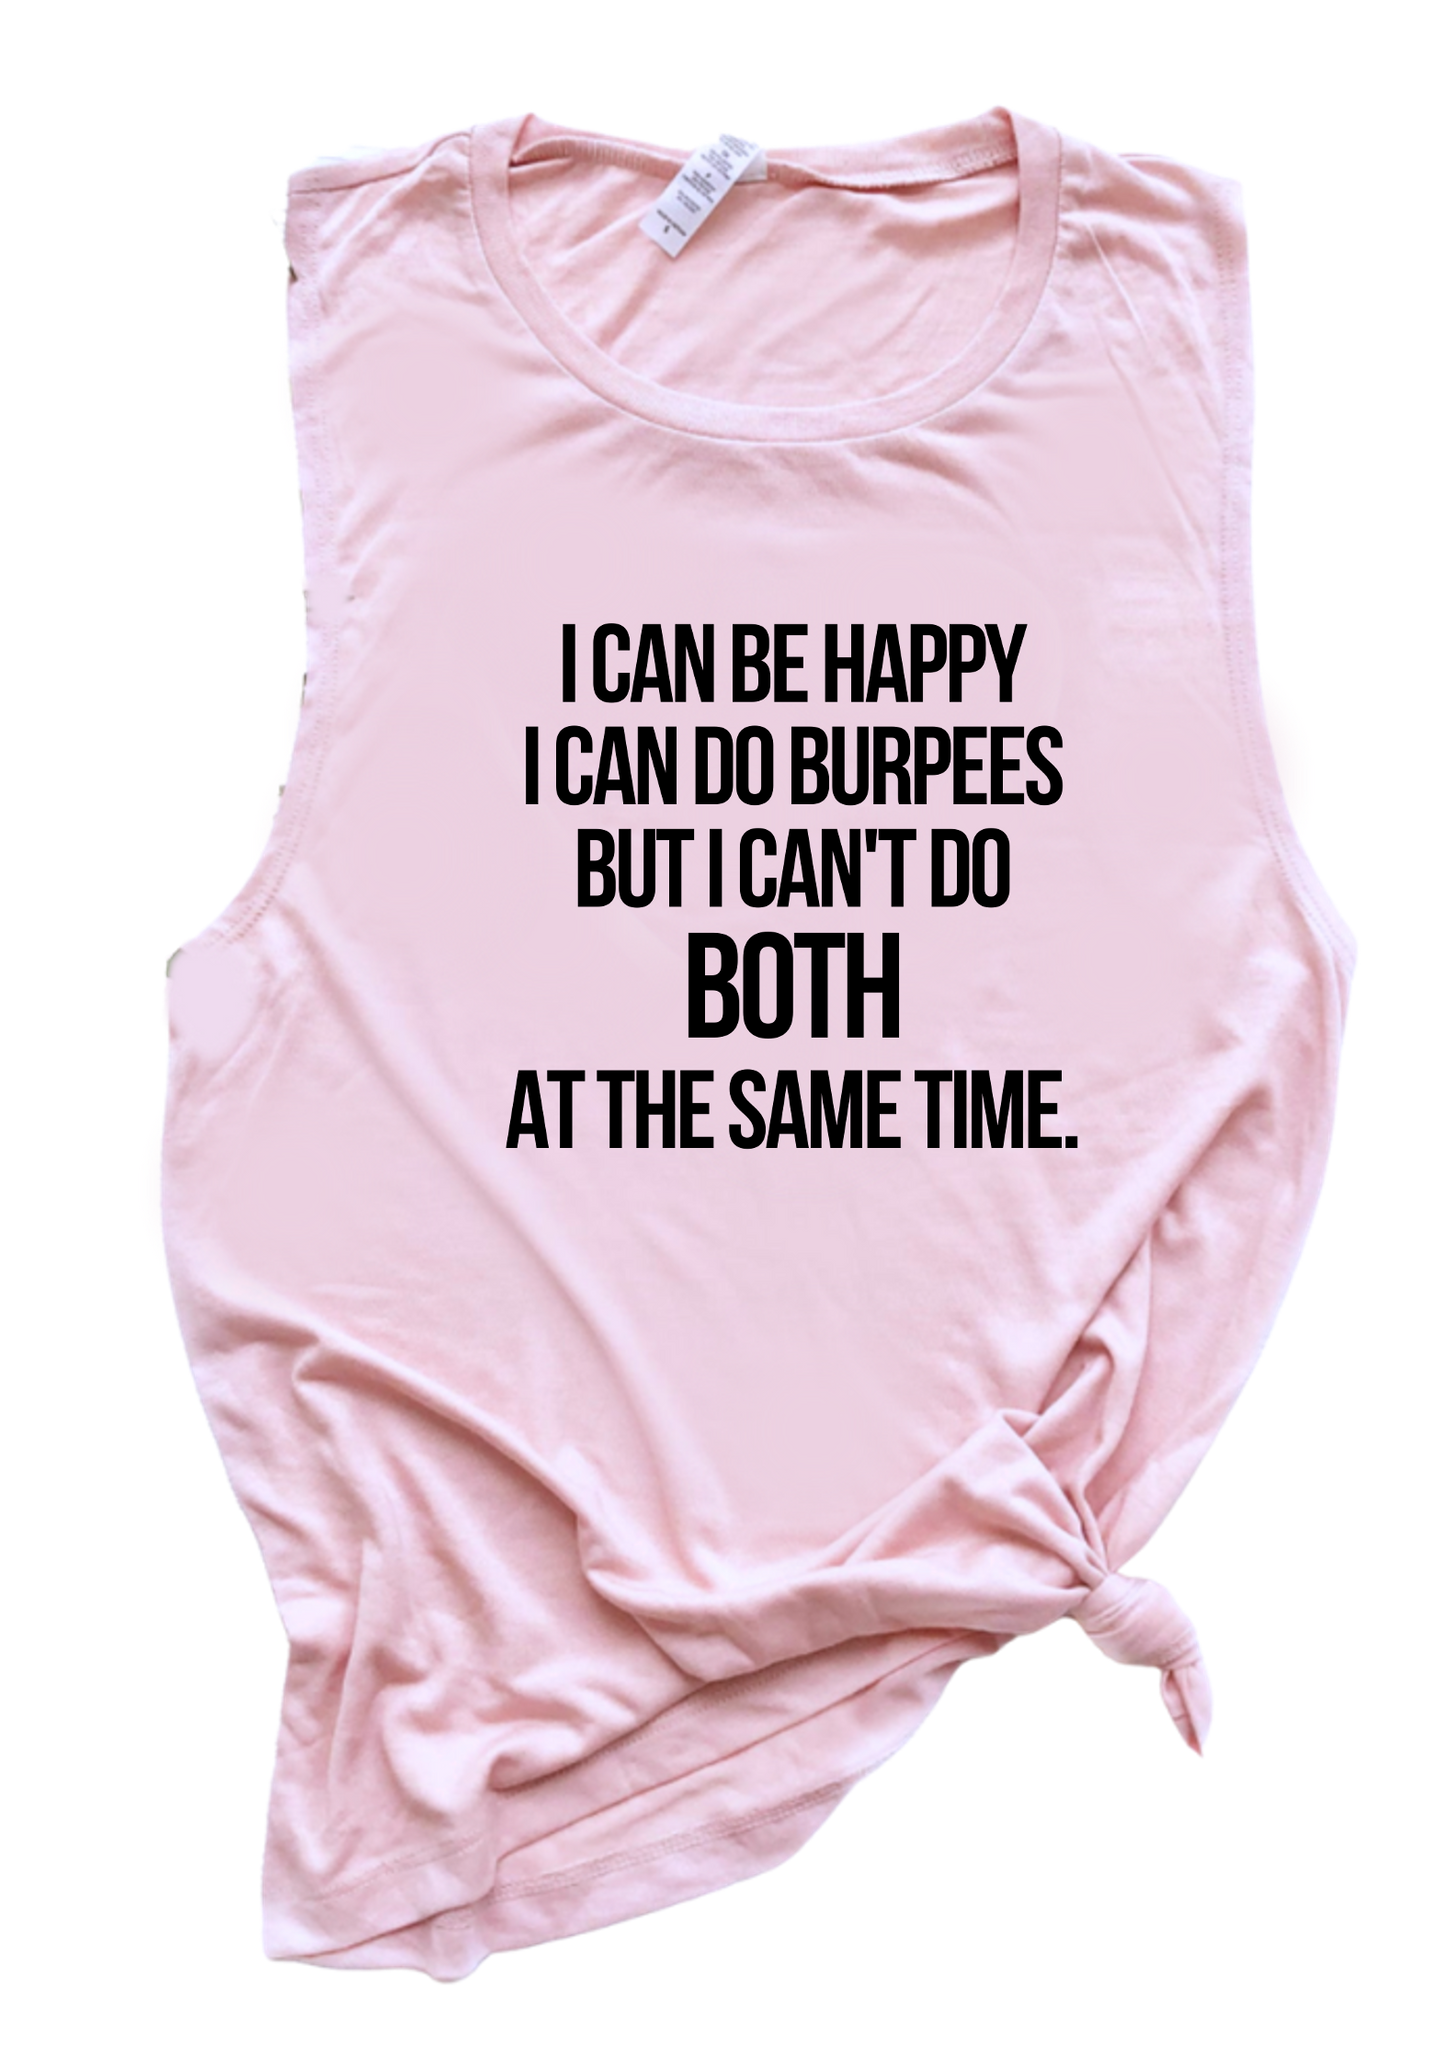 I CAN BE HAPPY I CAN DO BURPEES..